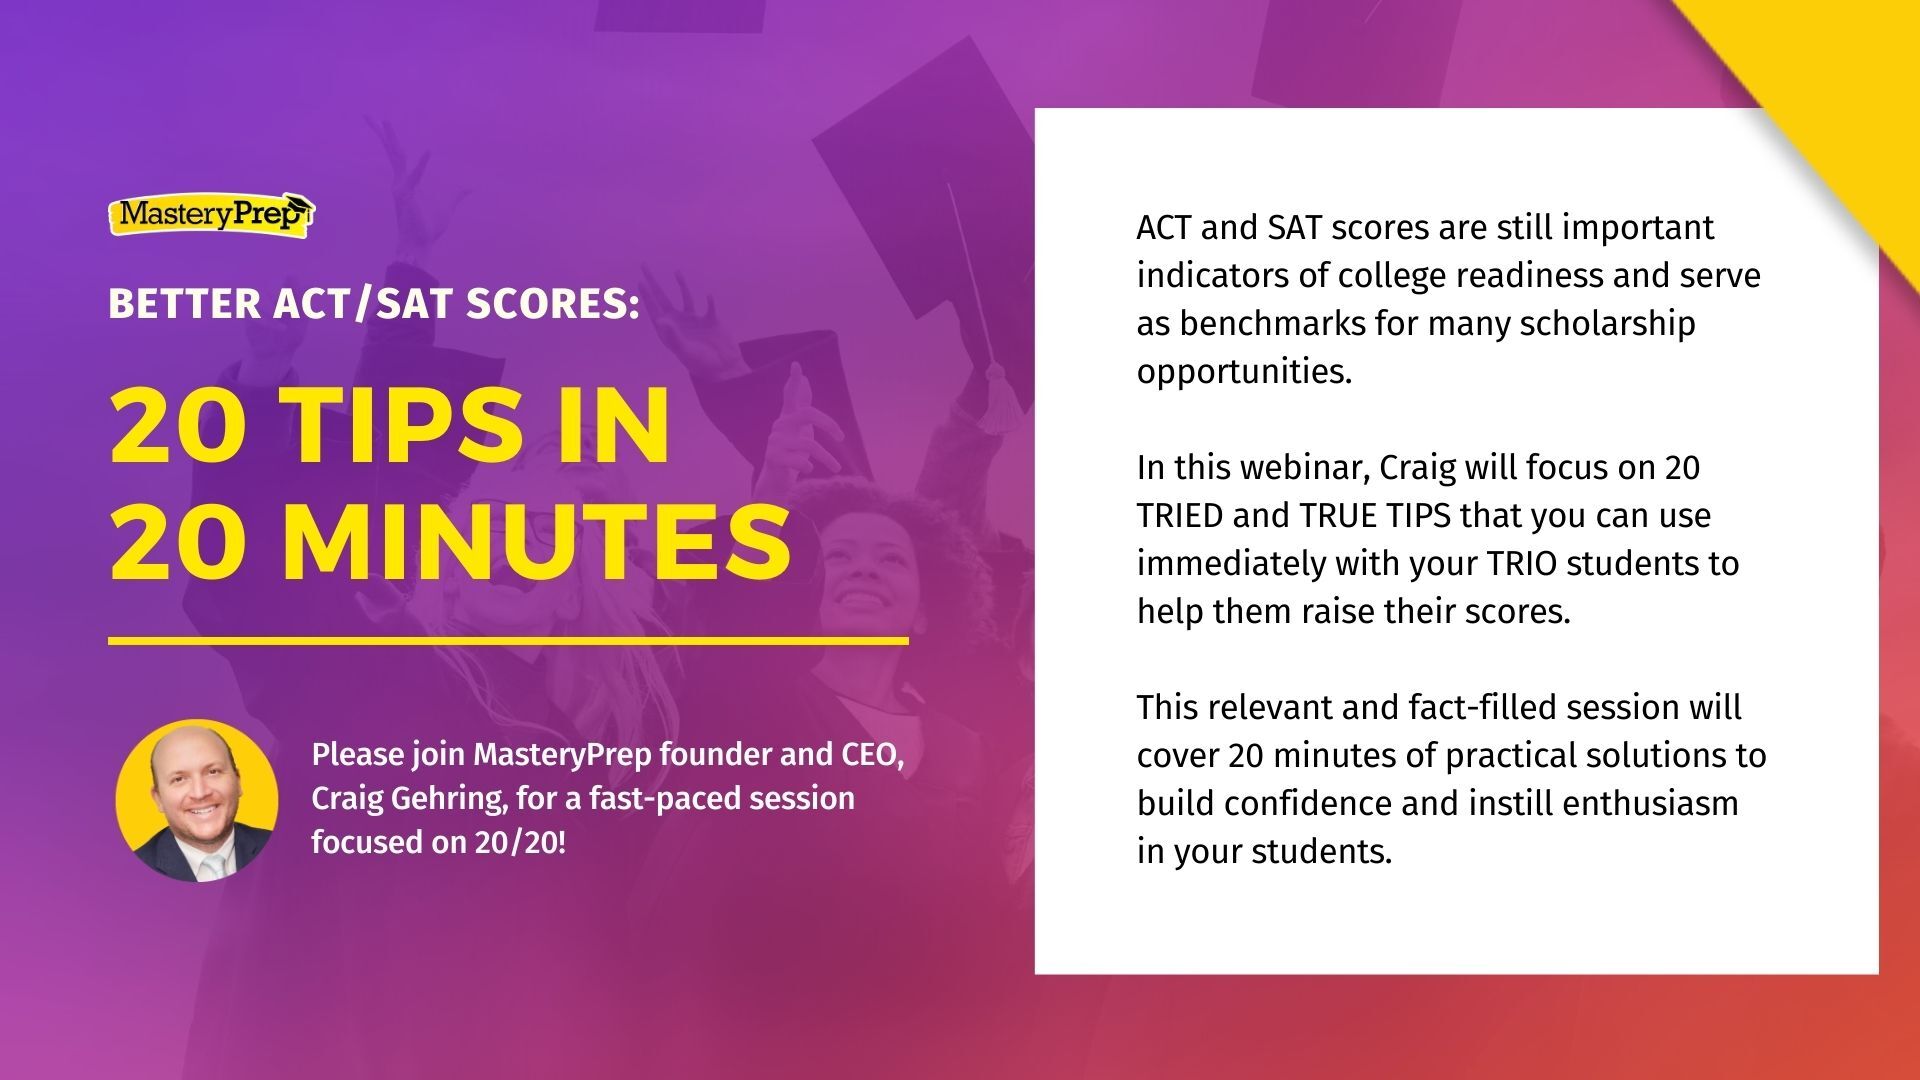 Better ACT/SAT Scores: 20 Tips in 20 Minutes